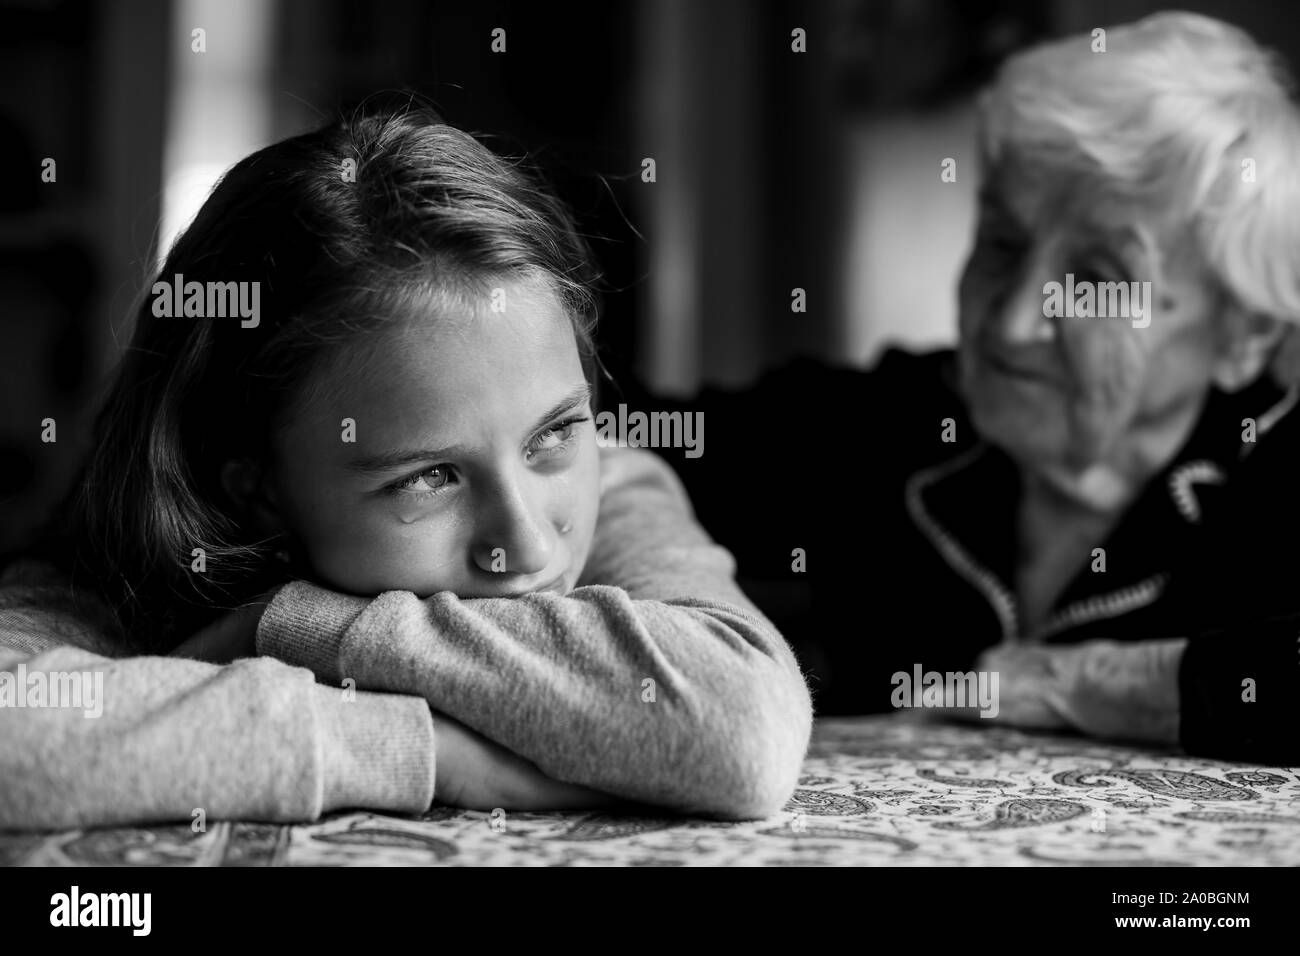 A crying little girl is comforted by her grandmother. Black and white photo. Stock Photo